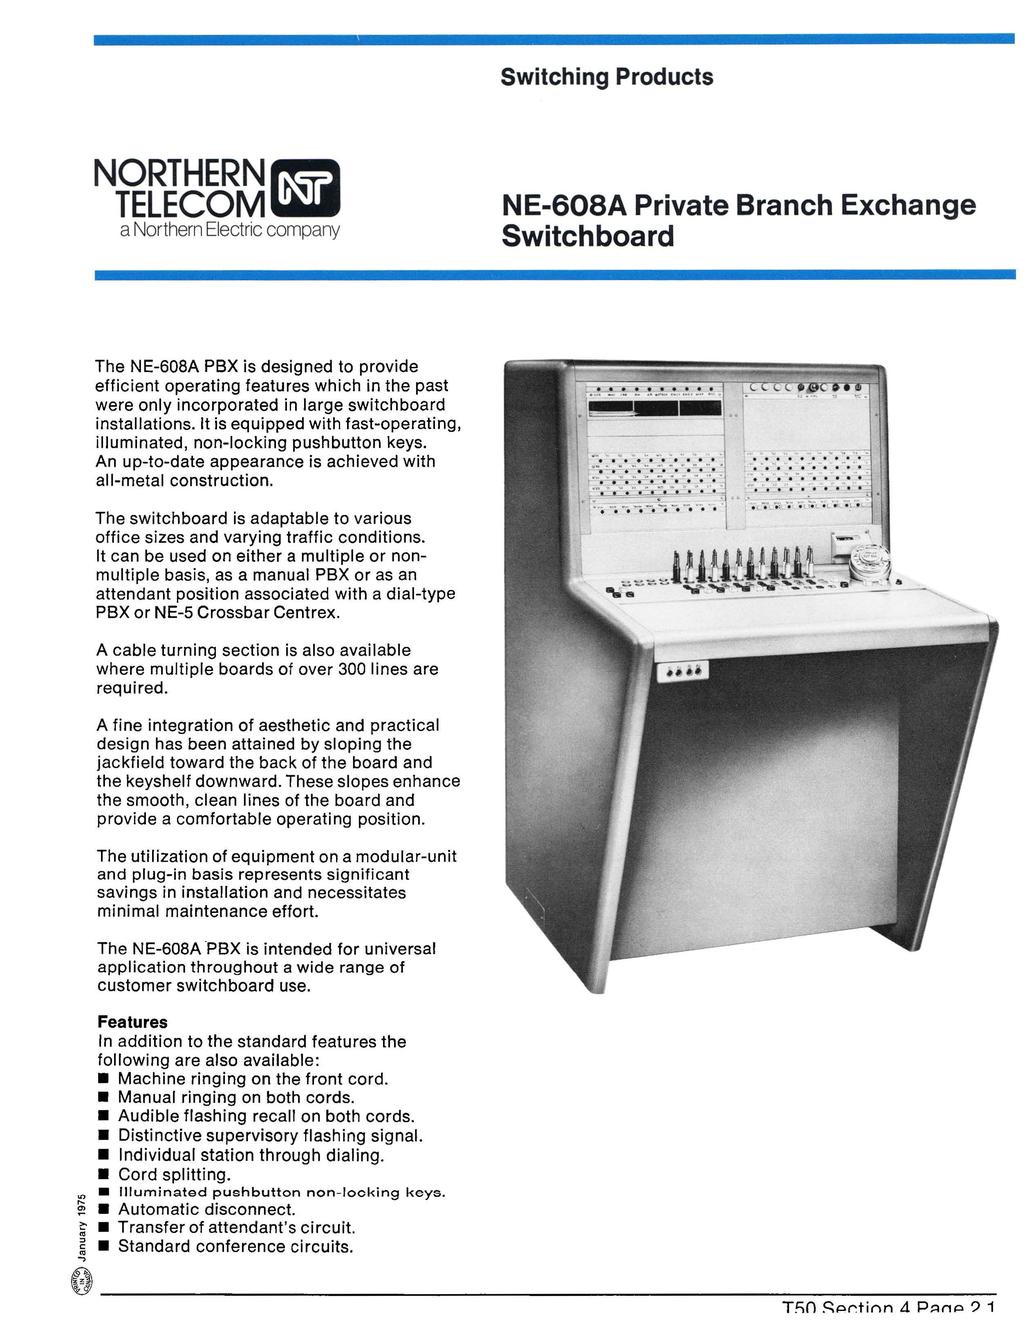 NE-608A Private Branch Exchange Switchboard The NE-608A PBX is designed to provide efficient operating features which in the past were only incorporated in large switchboard installations.